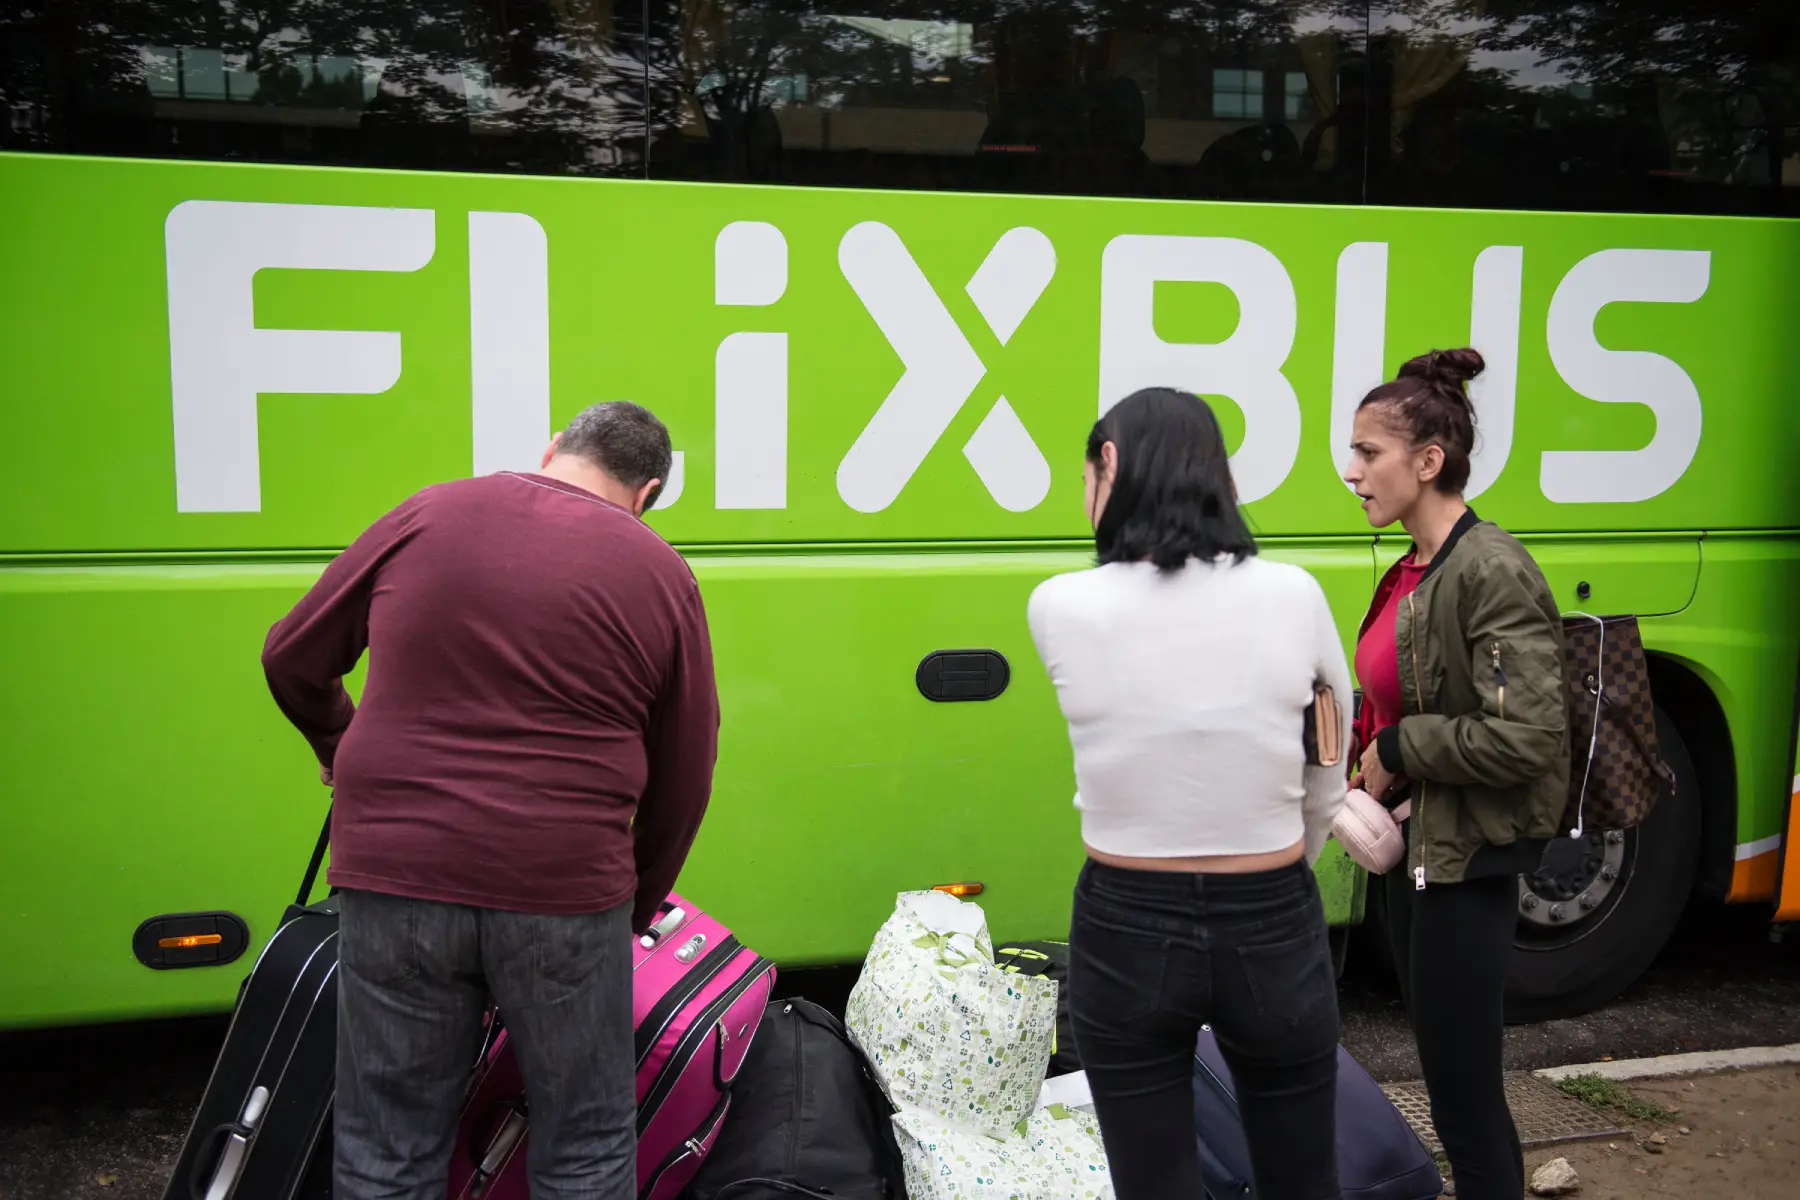 Passengers with luggage waiting to board a Flixbus in Torino